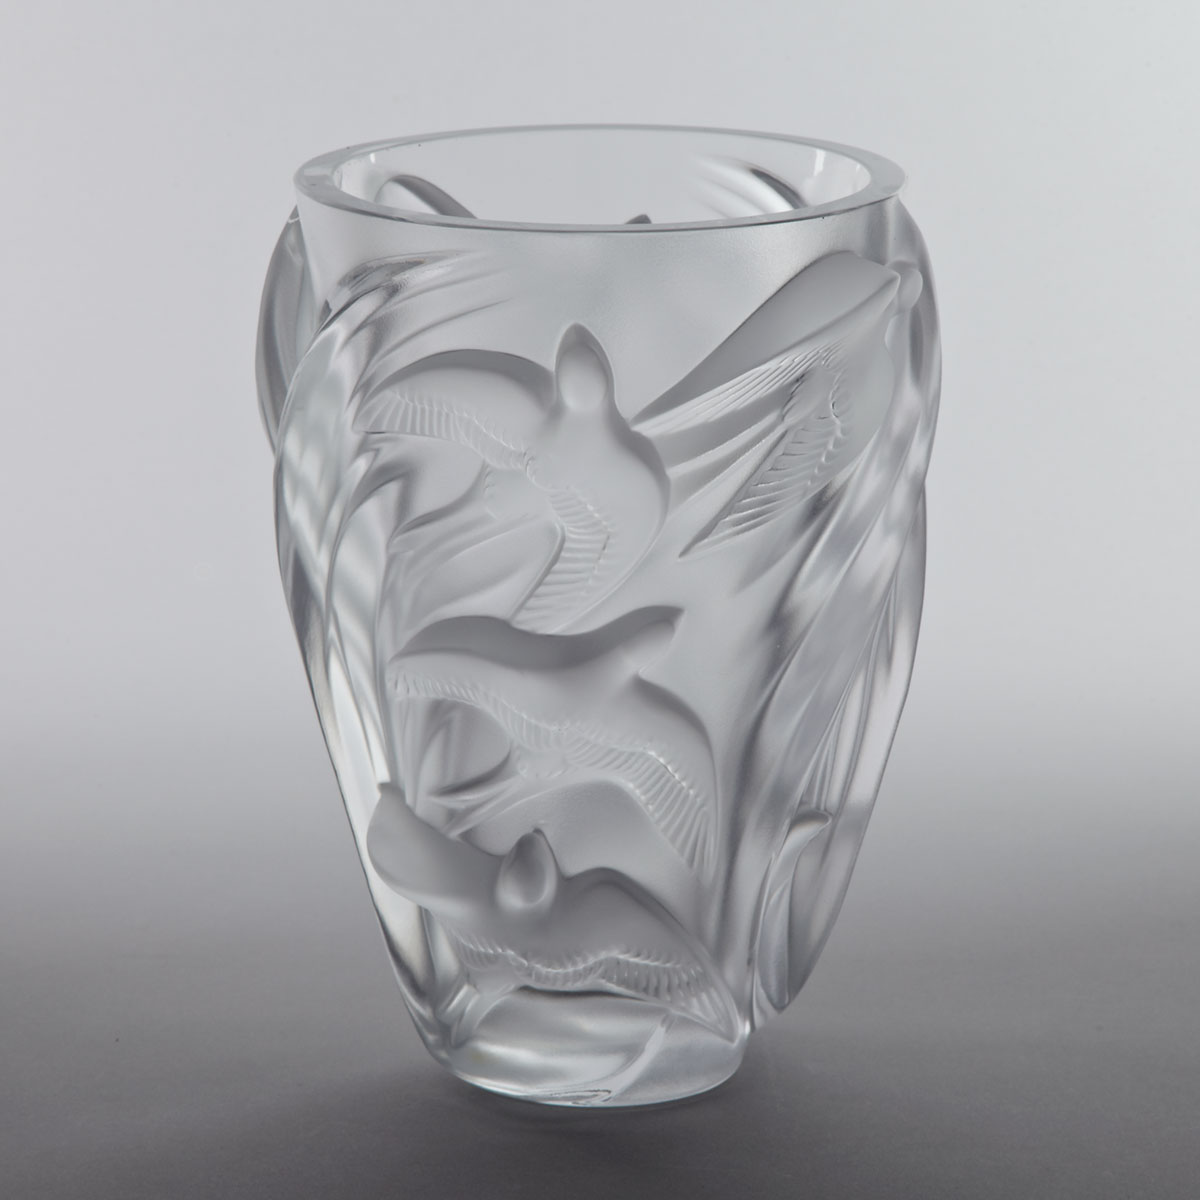 ‘Martinets’, Lalique Moulded and Frosted Glass Vase, post-1980